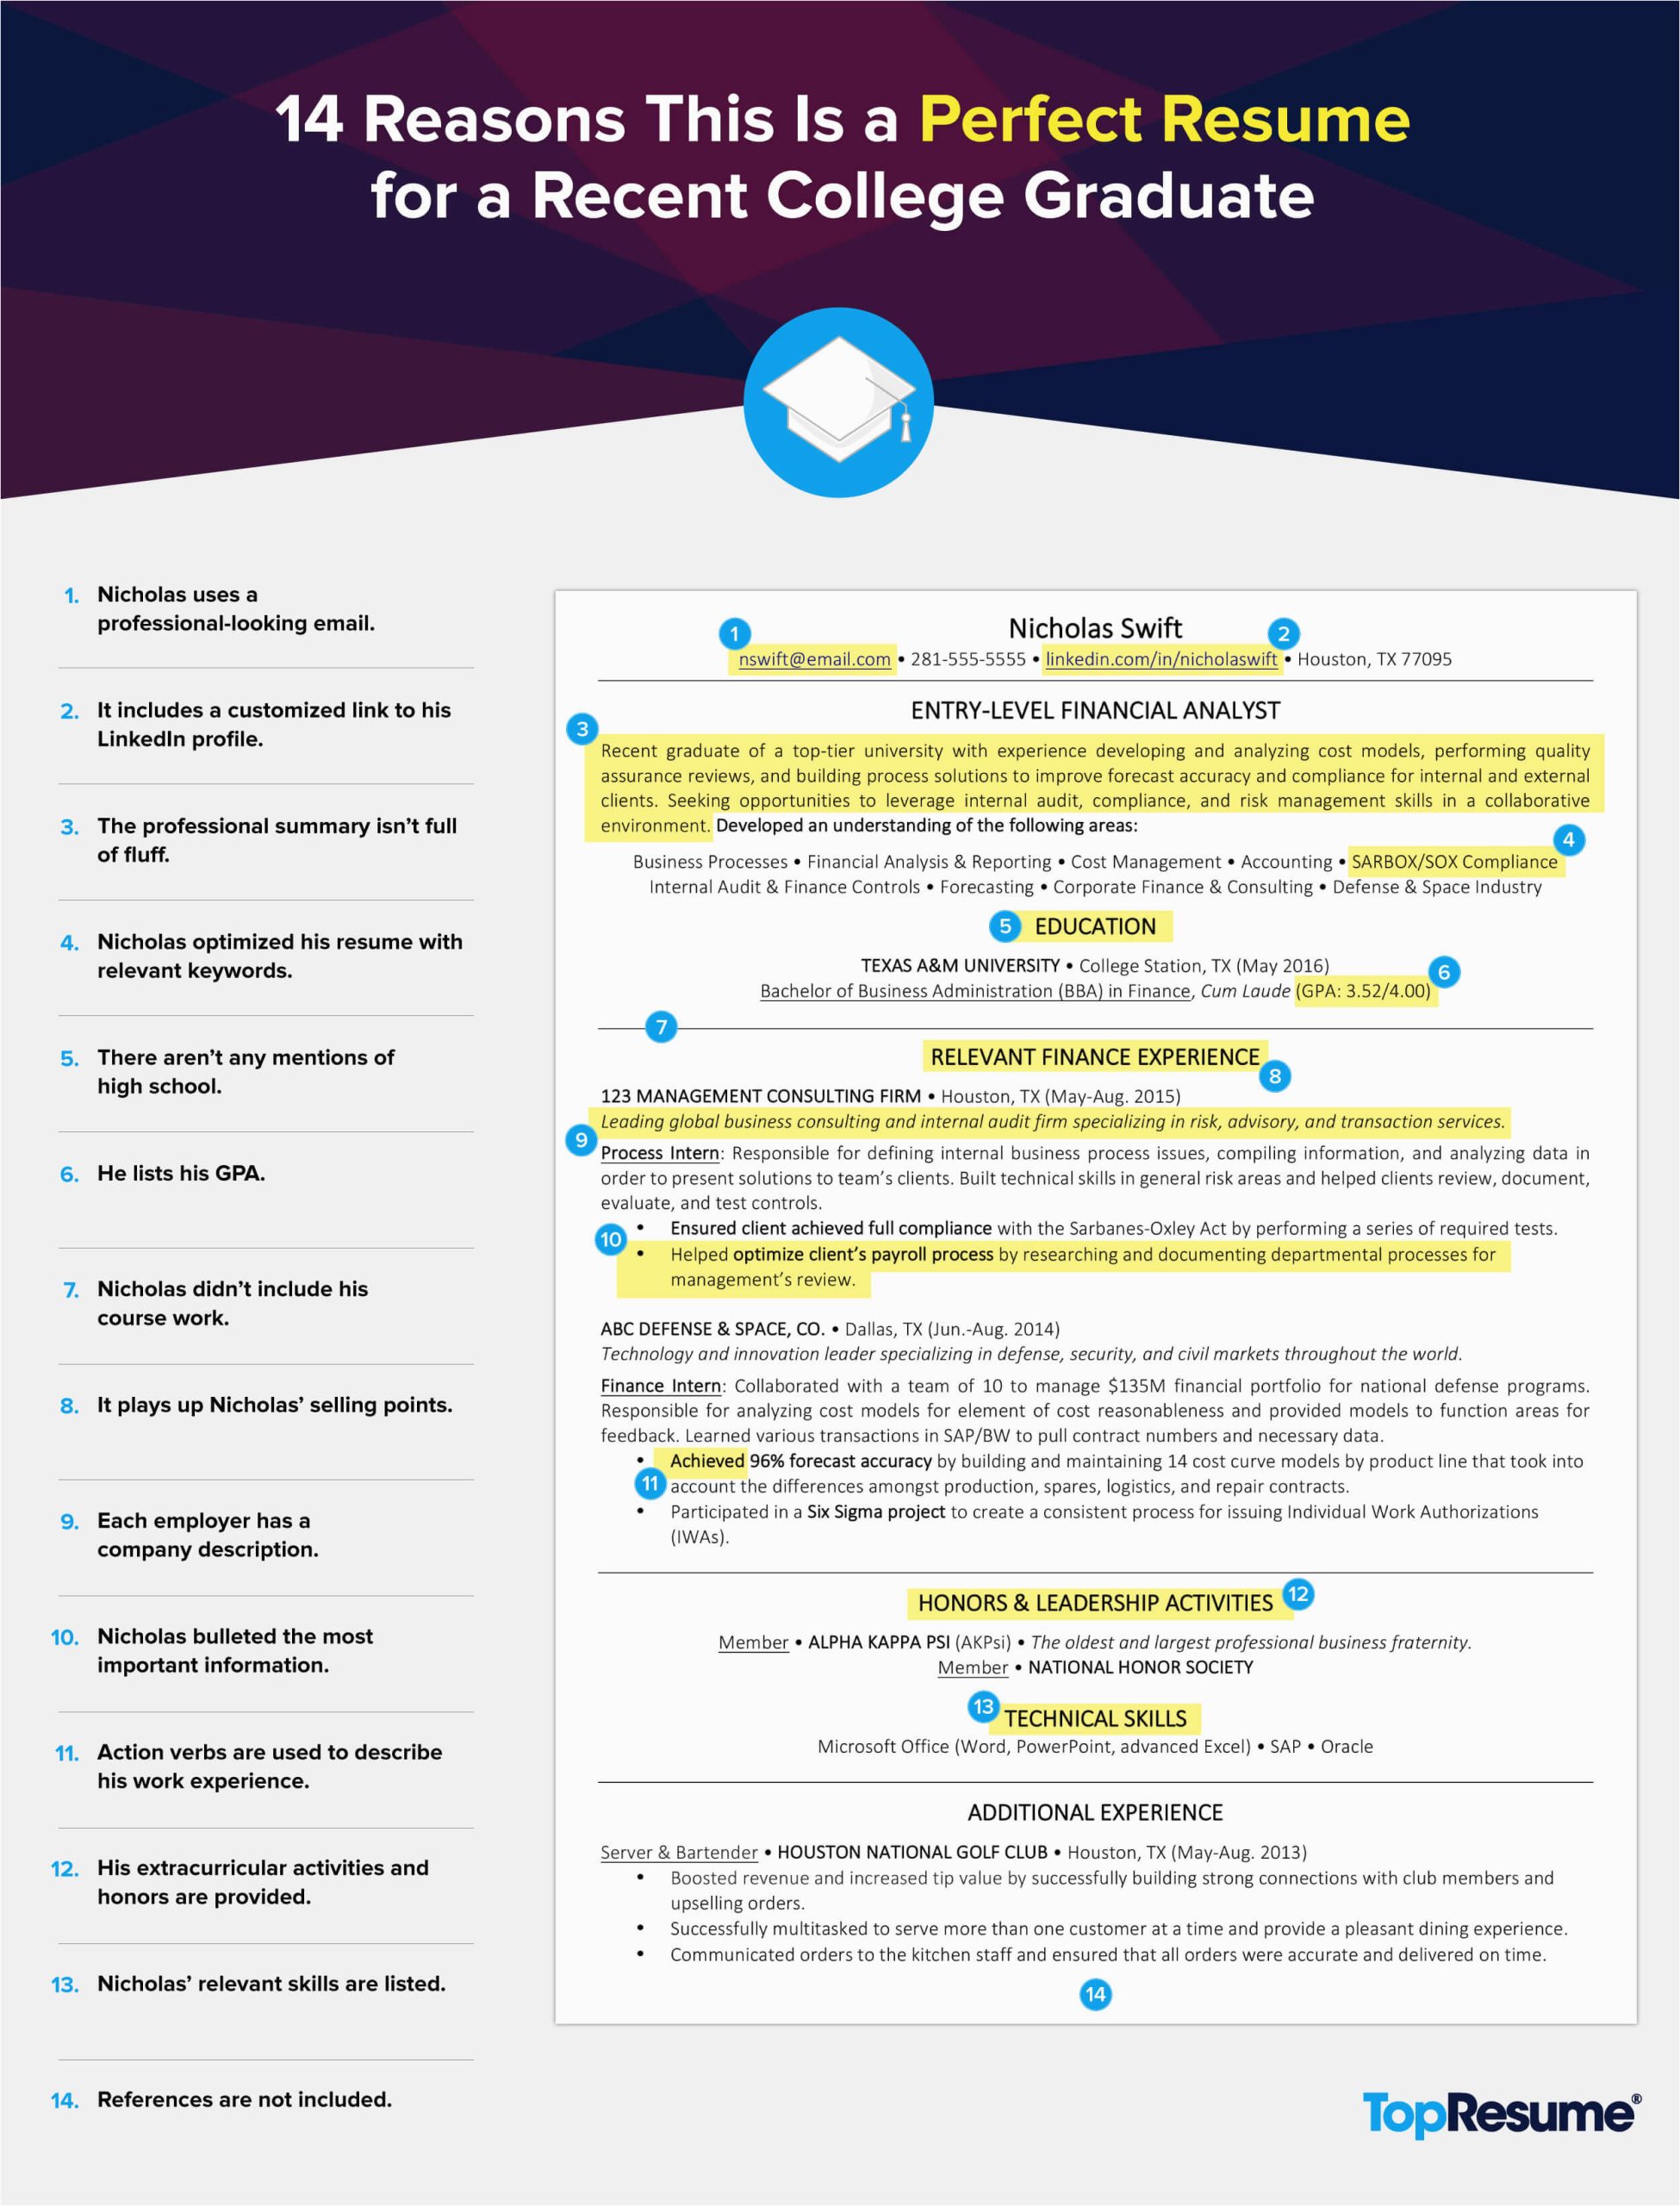 Sample Resumes for Graphic Design Recent Graduate 14 Reasons This is A Perfect Recent College Graduate Resume